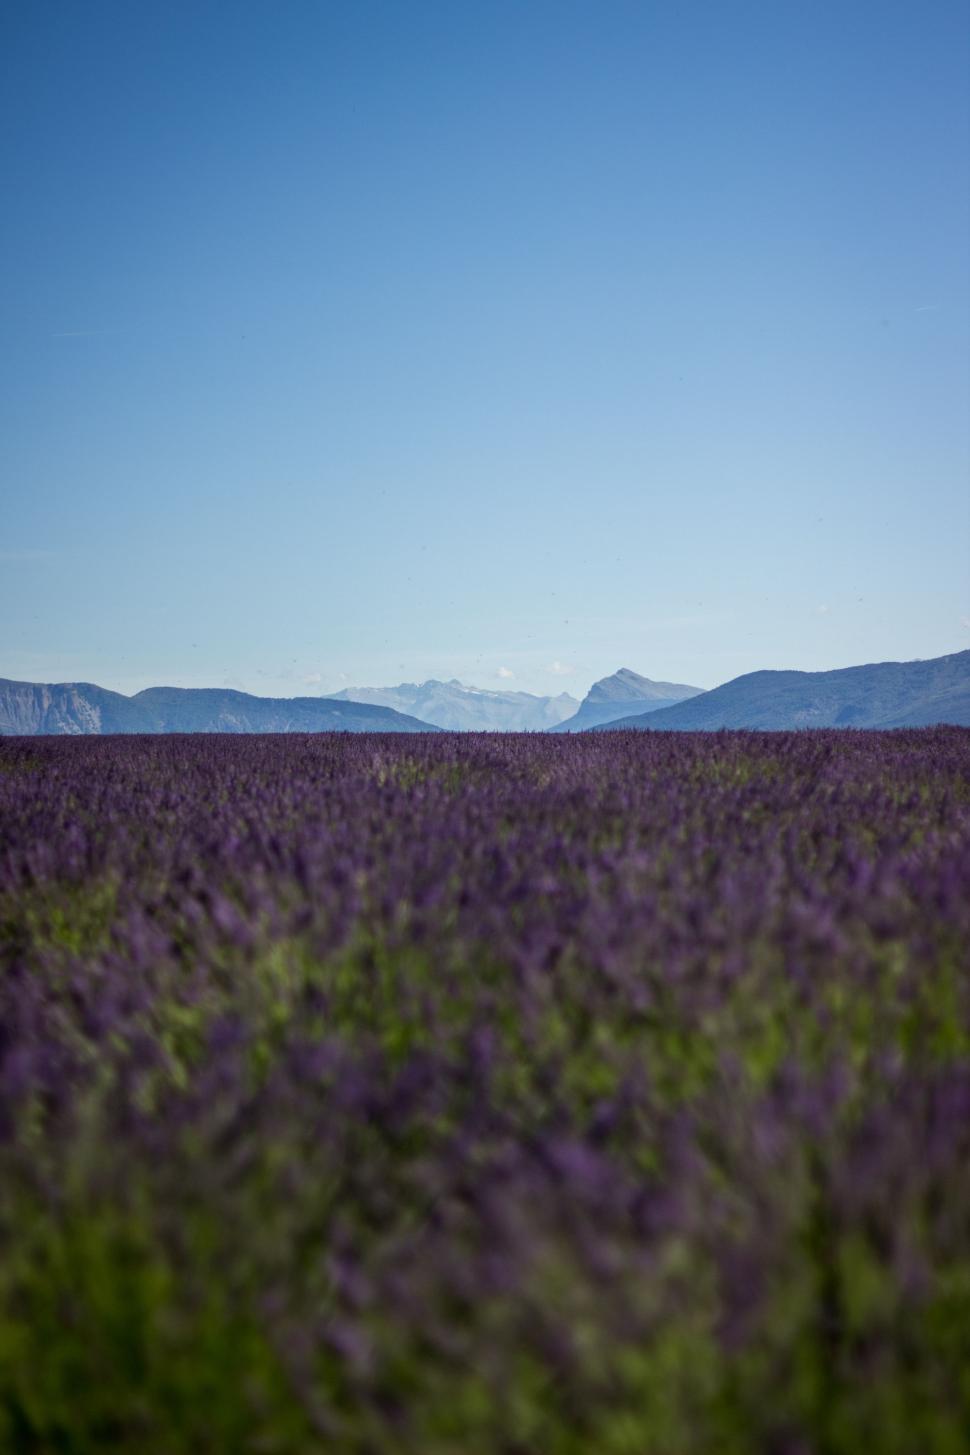 Free Image of Field of Purple Flowers With Mountains in the Background 